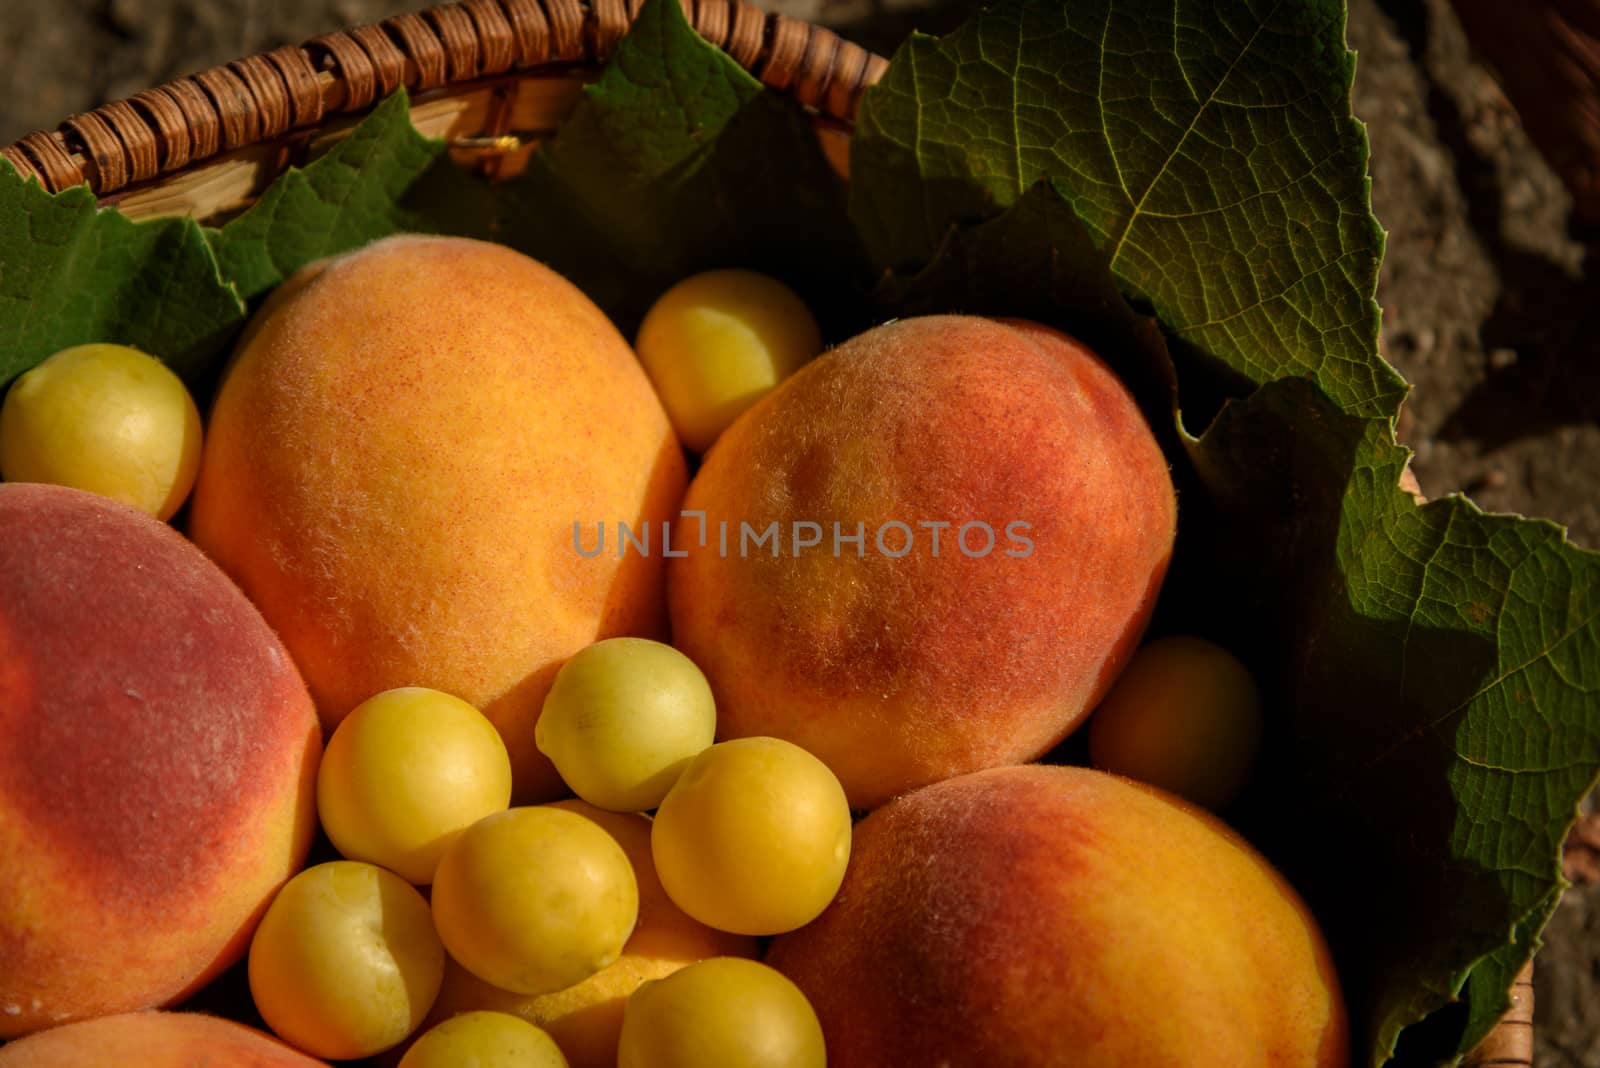 Orange peaches and cherry plums lie in a basket under the rays of a warm sunset